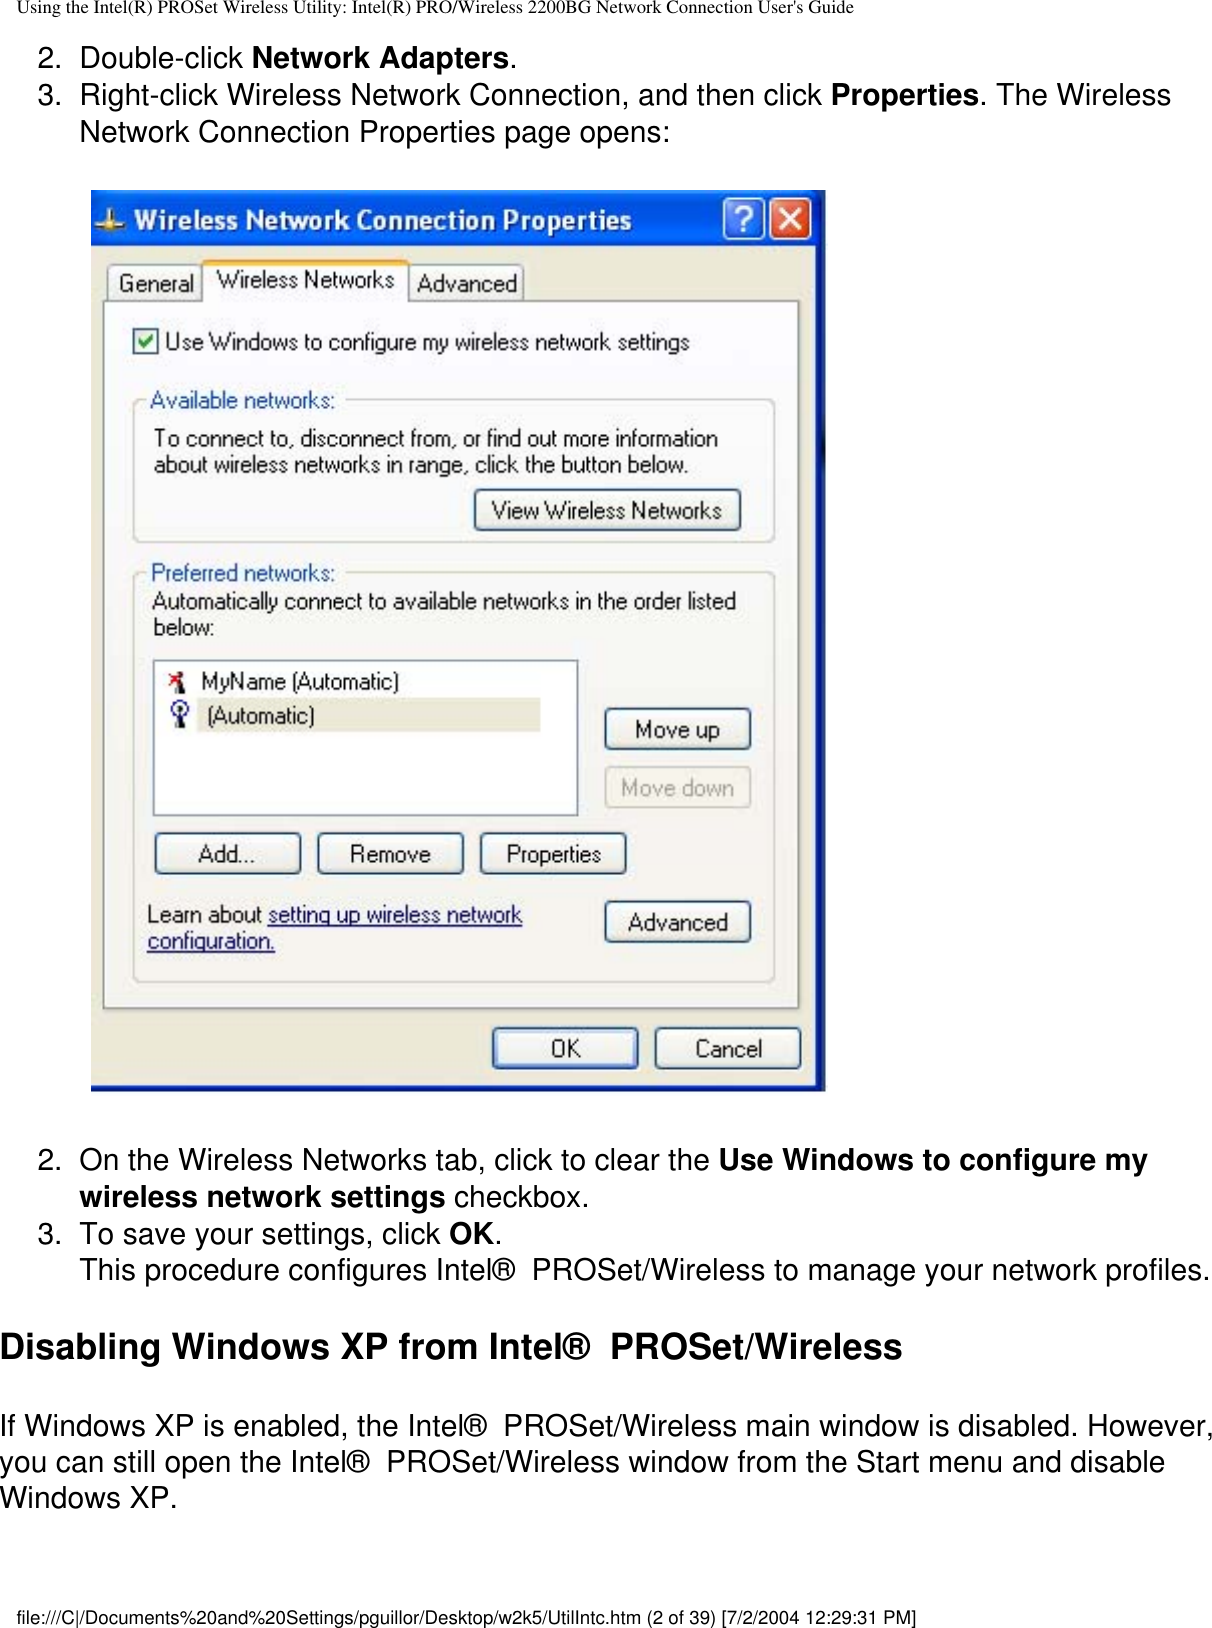 Using the Intel(R) PROSet Wireless Utility: Intel(R) PRO/Wireless 2200BG Network Connection User&apos;s Guide2.  Double-click Network Adapters.3.  Right-click Wireless Network Connection, and then click Properties. The Wireless Network Connection Properties page opens:           2.  On the Wireless Networks tab, click to clear the Use Windows to configure my wireless network settings checkbox.3.  To save your settings, click OK.This procedure configures Intel®  PROSet/Wireless to manage your network profiles.Disabling Windows XP from Intel®  PROSet/WirelessIf Windows XP is enabled, the Intel®  PROSet/Wireless main window is disabled. However, you can still open the Intel®  PROSet/Wireless window from the Start menu and disable Windows XP. file:///C|/Documents%20and%20Settings/pguillor/Desktop/w2k5/UtilIntc.htm (2 of 39) [7/2/2004 12:29:31 PM]